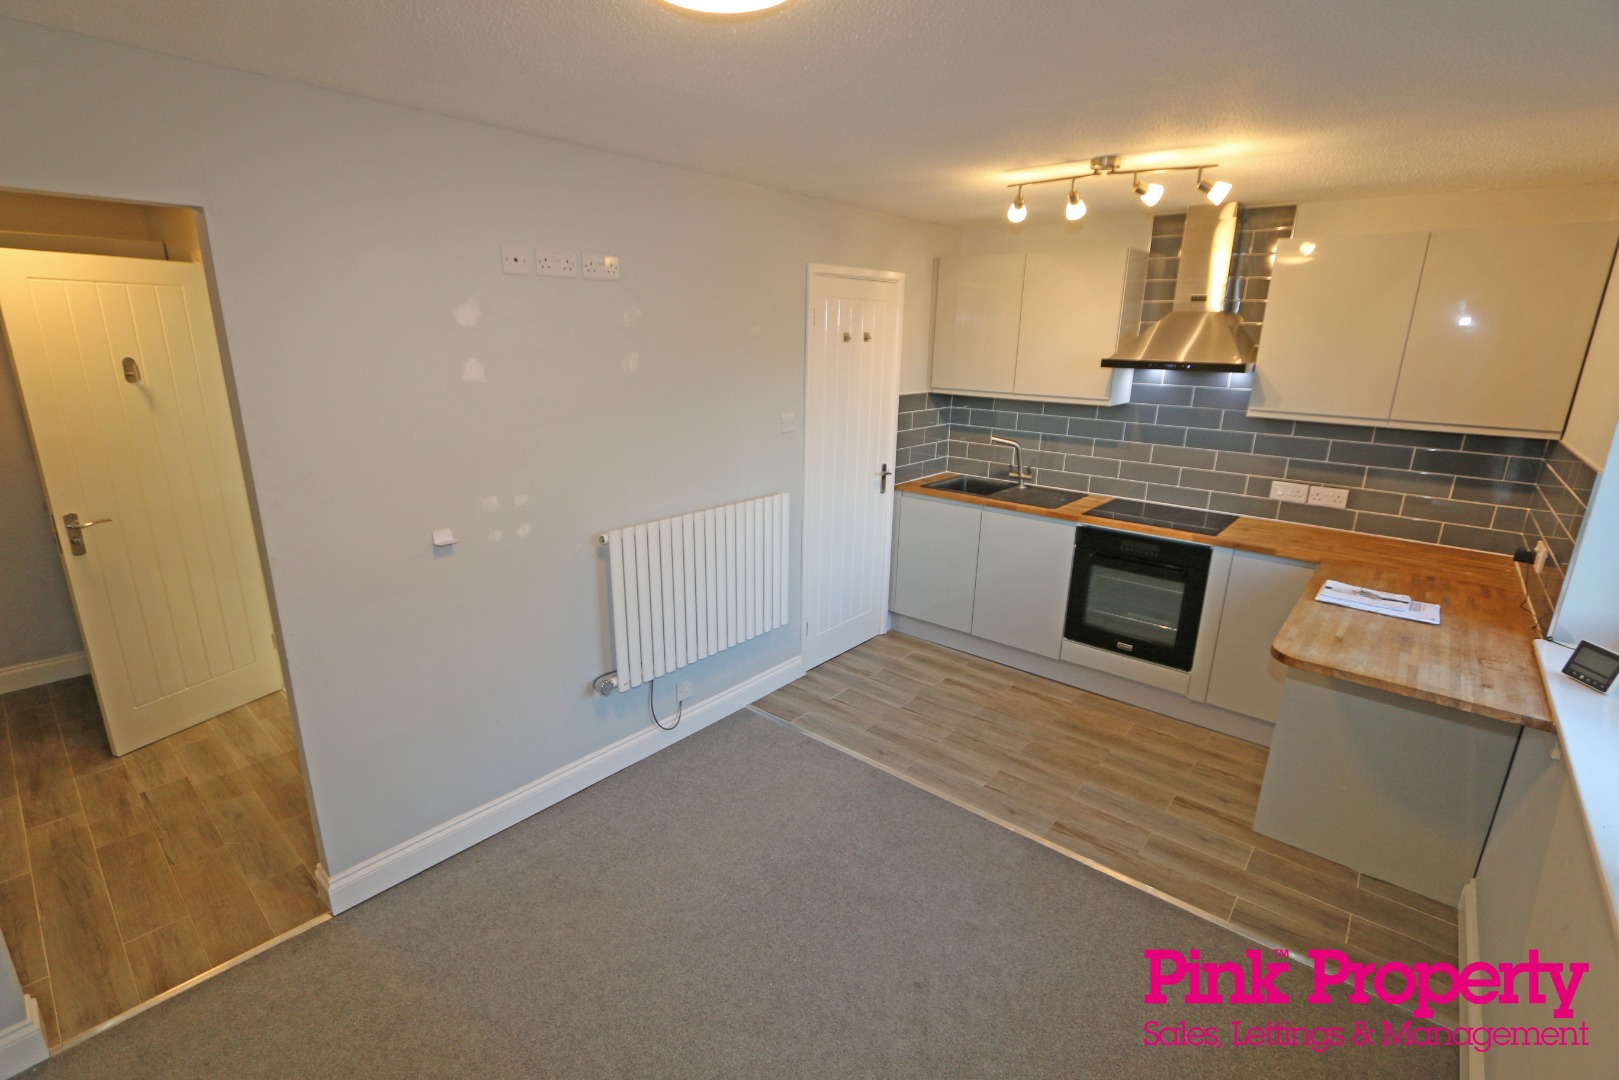 1 bed flat to rent in Brevere Road - Property Image 1